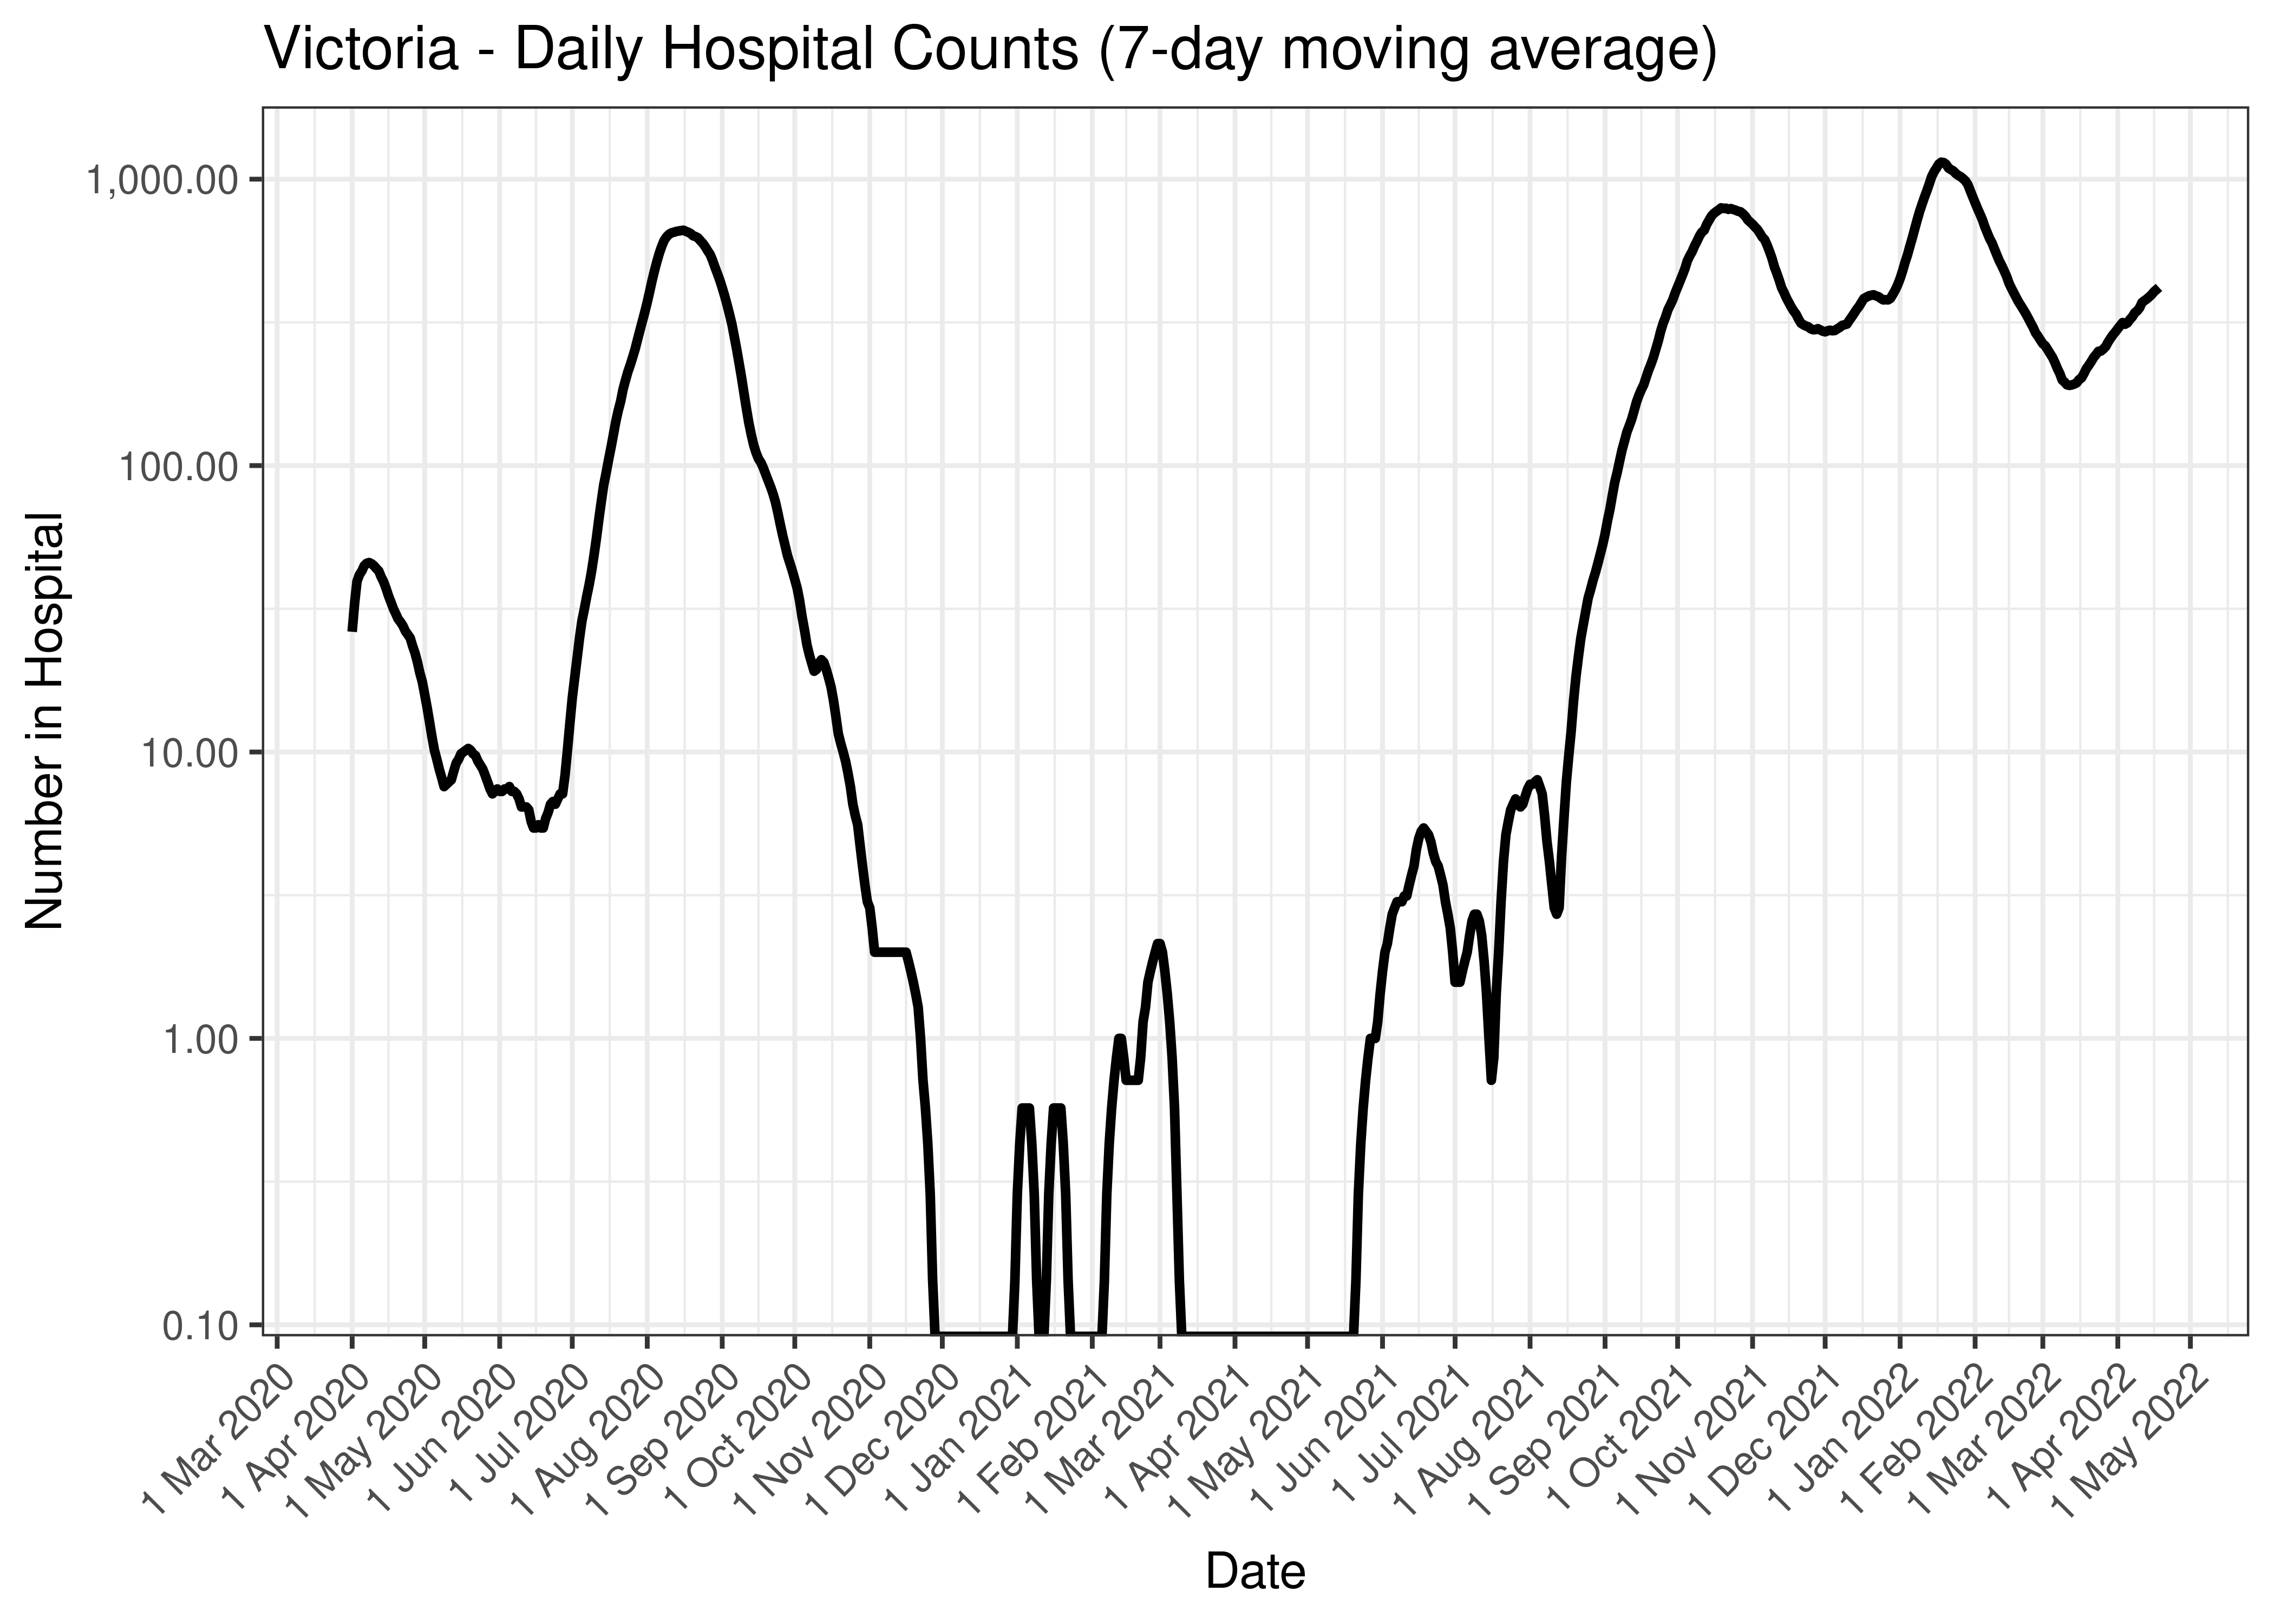 Victoria - Daily Hospital Counts (7-day moving average)